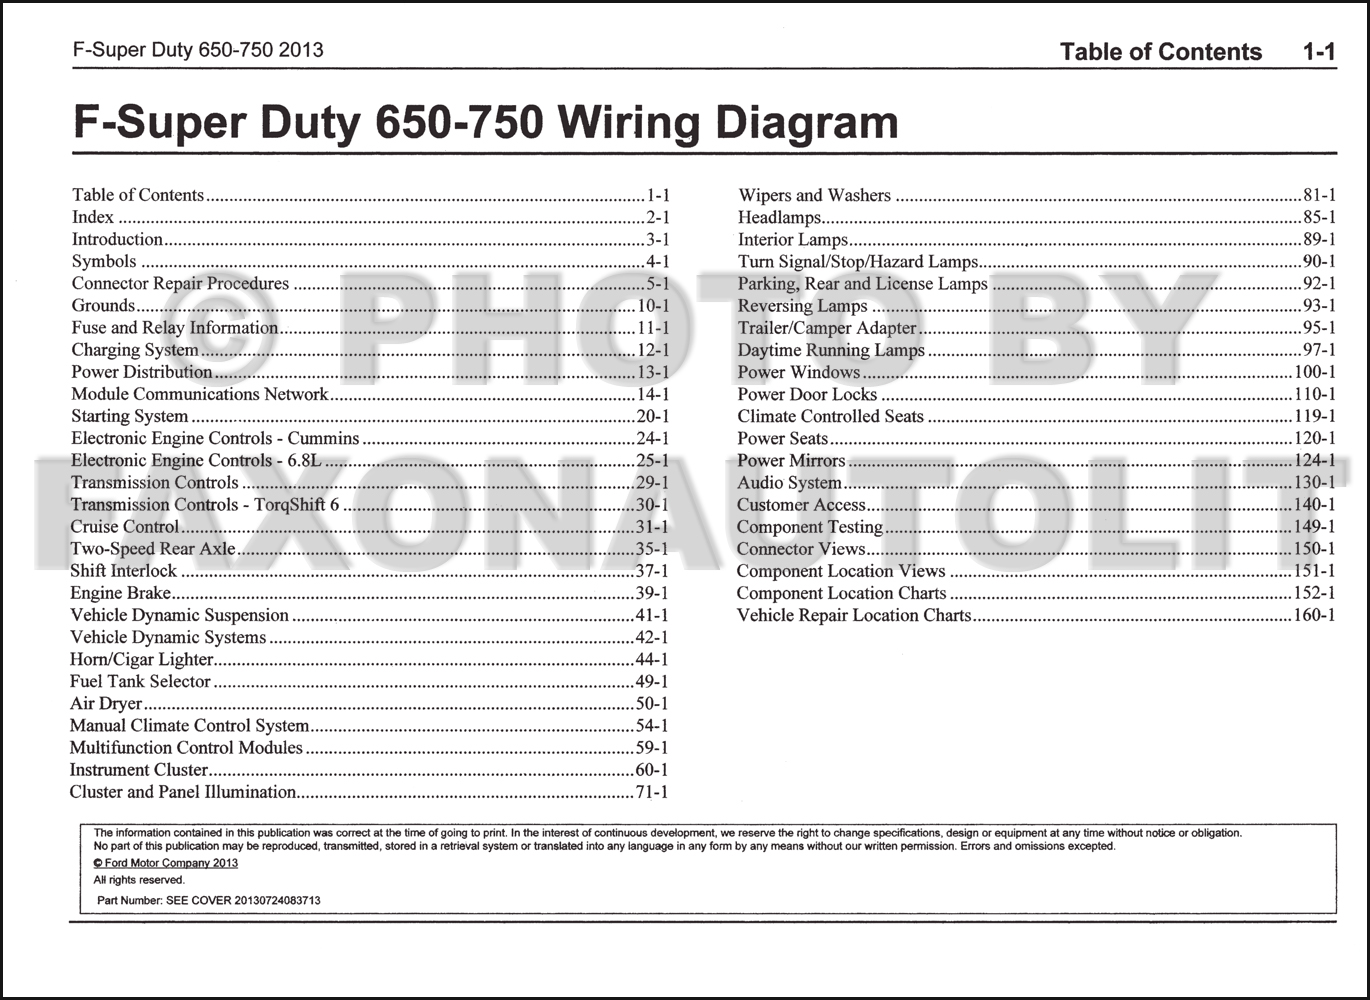 2013-2014 Ford F-650 and F-750 Super Duty Truck Wiring Diagram Manual